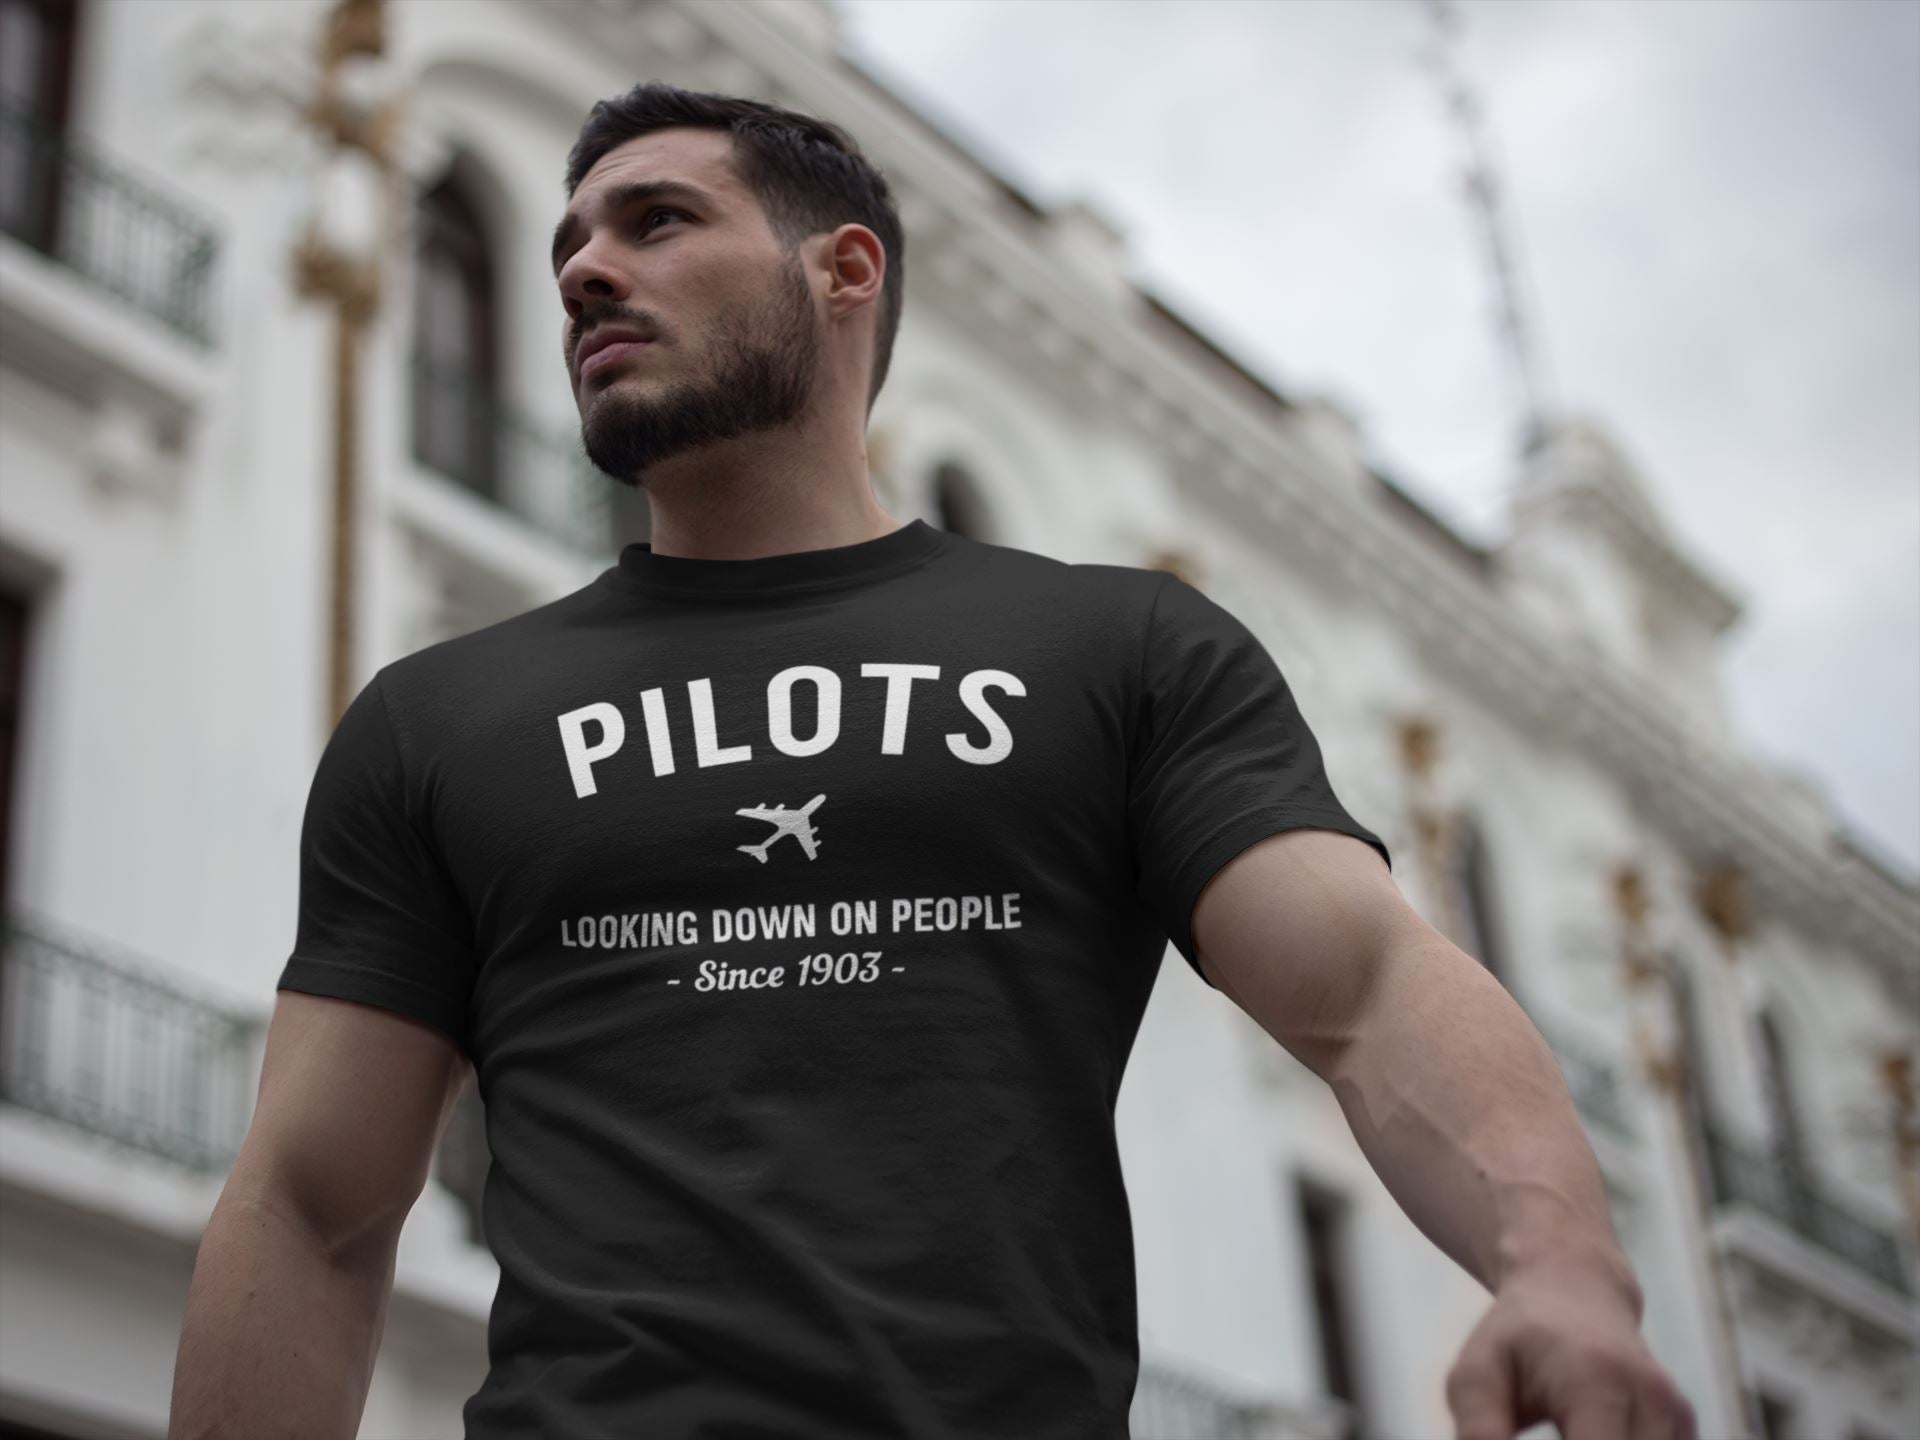 Pilots Looking Down on People Since 1903 Exclusive Navy Blue T Shirt for Men and Women Printrove 